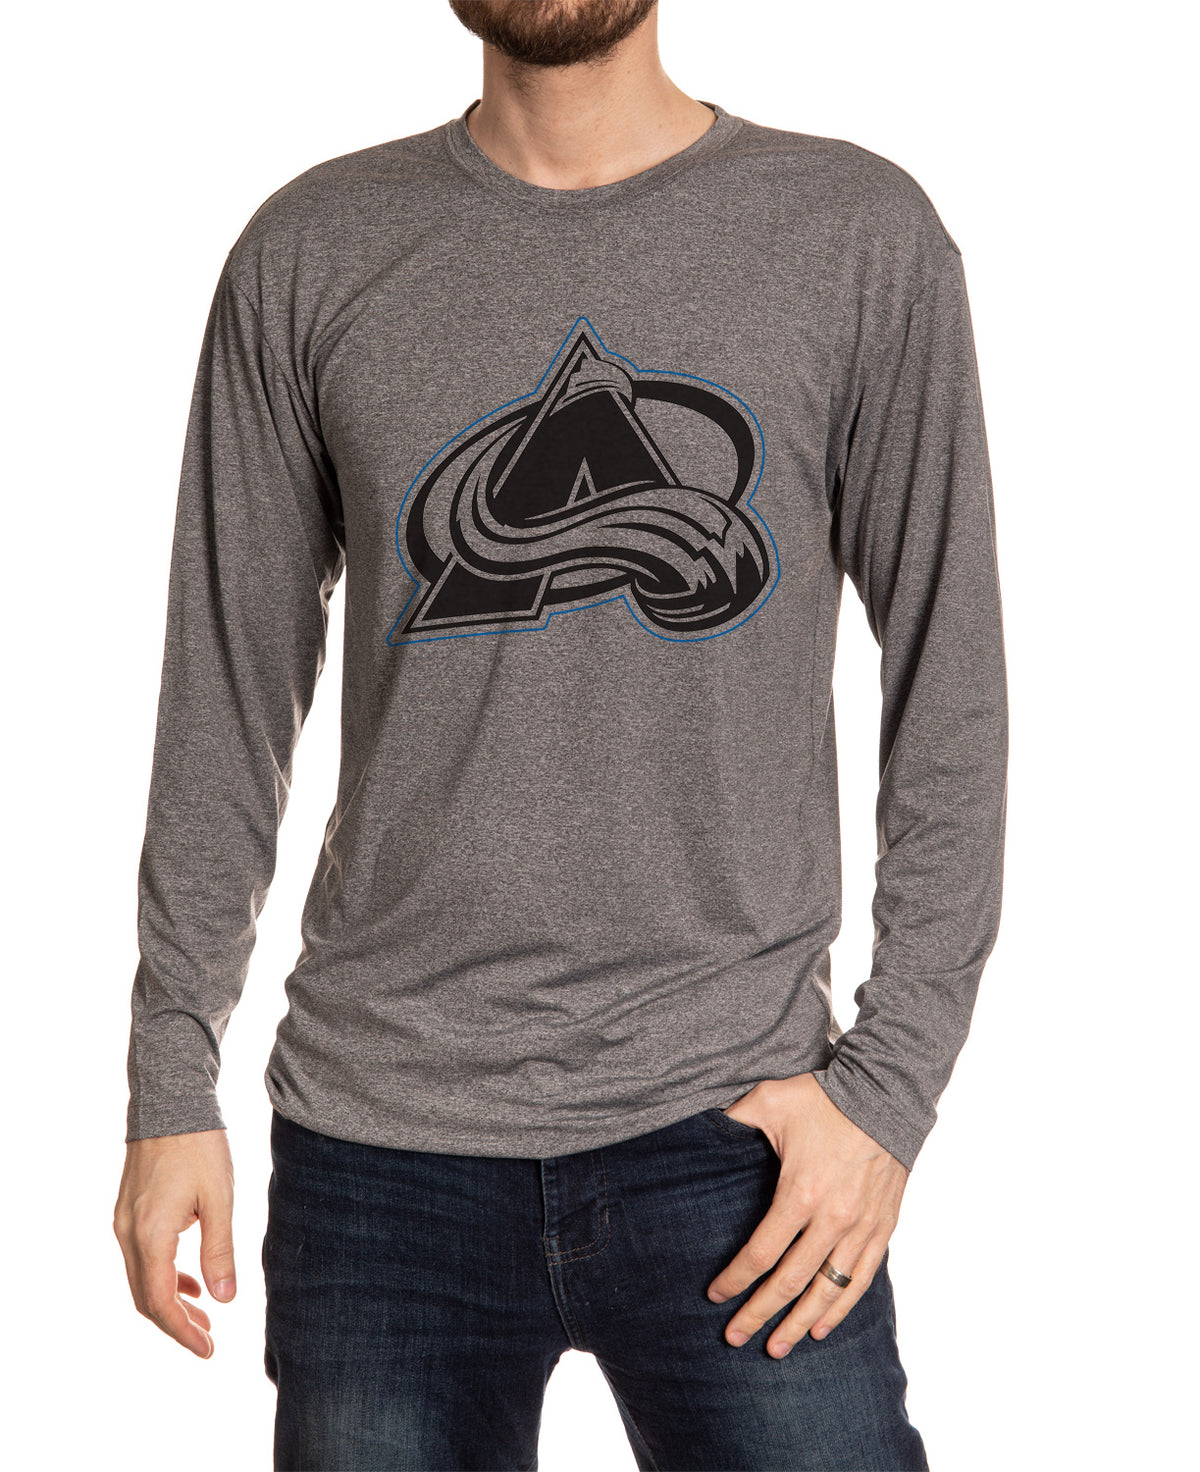 Colorado Avlanche Long Sleeve Blackout Shirt Front View